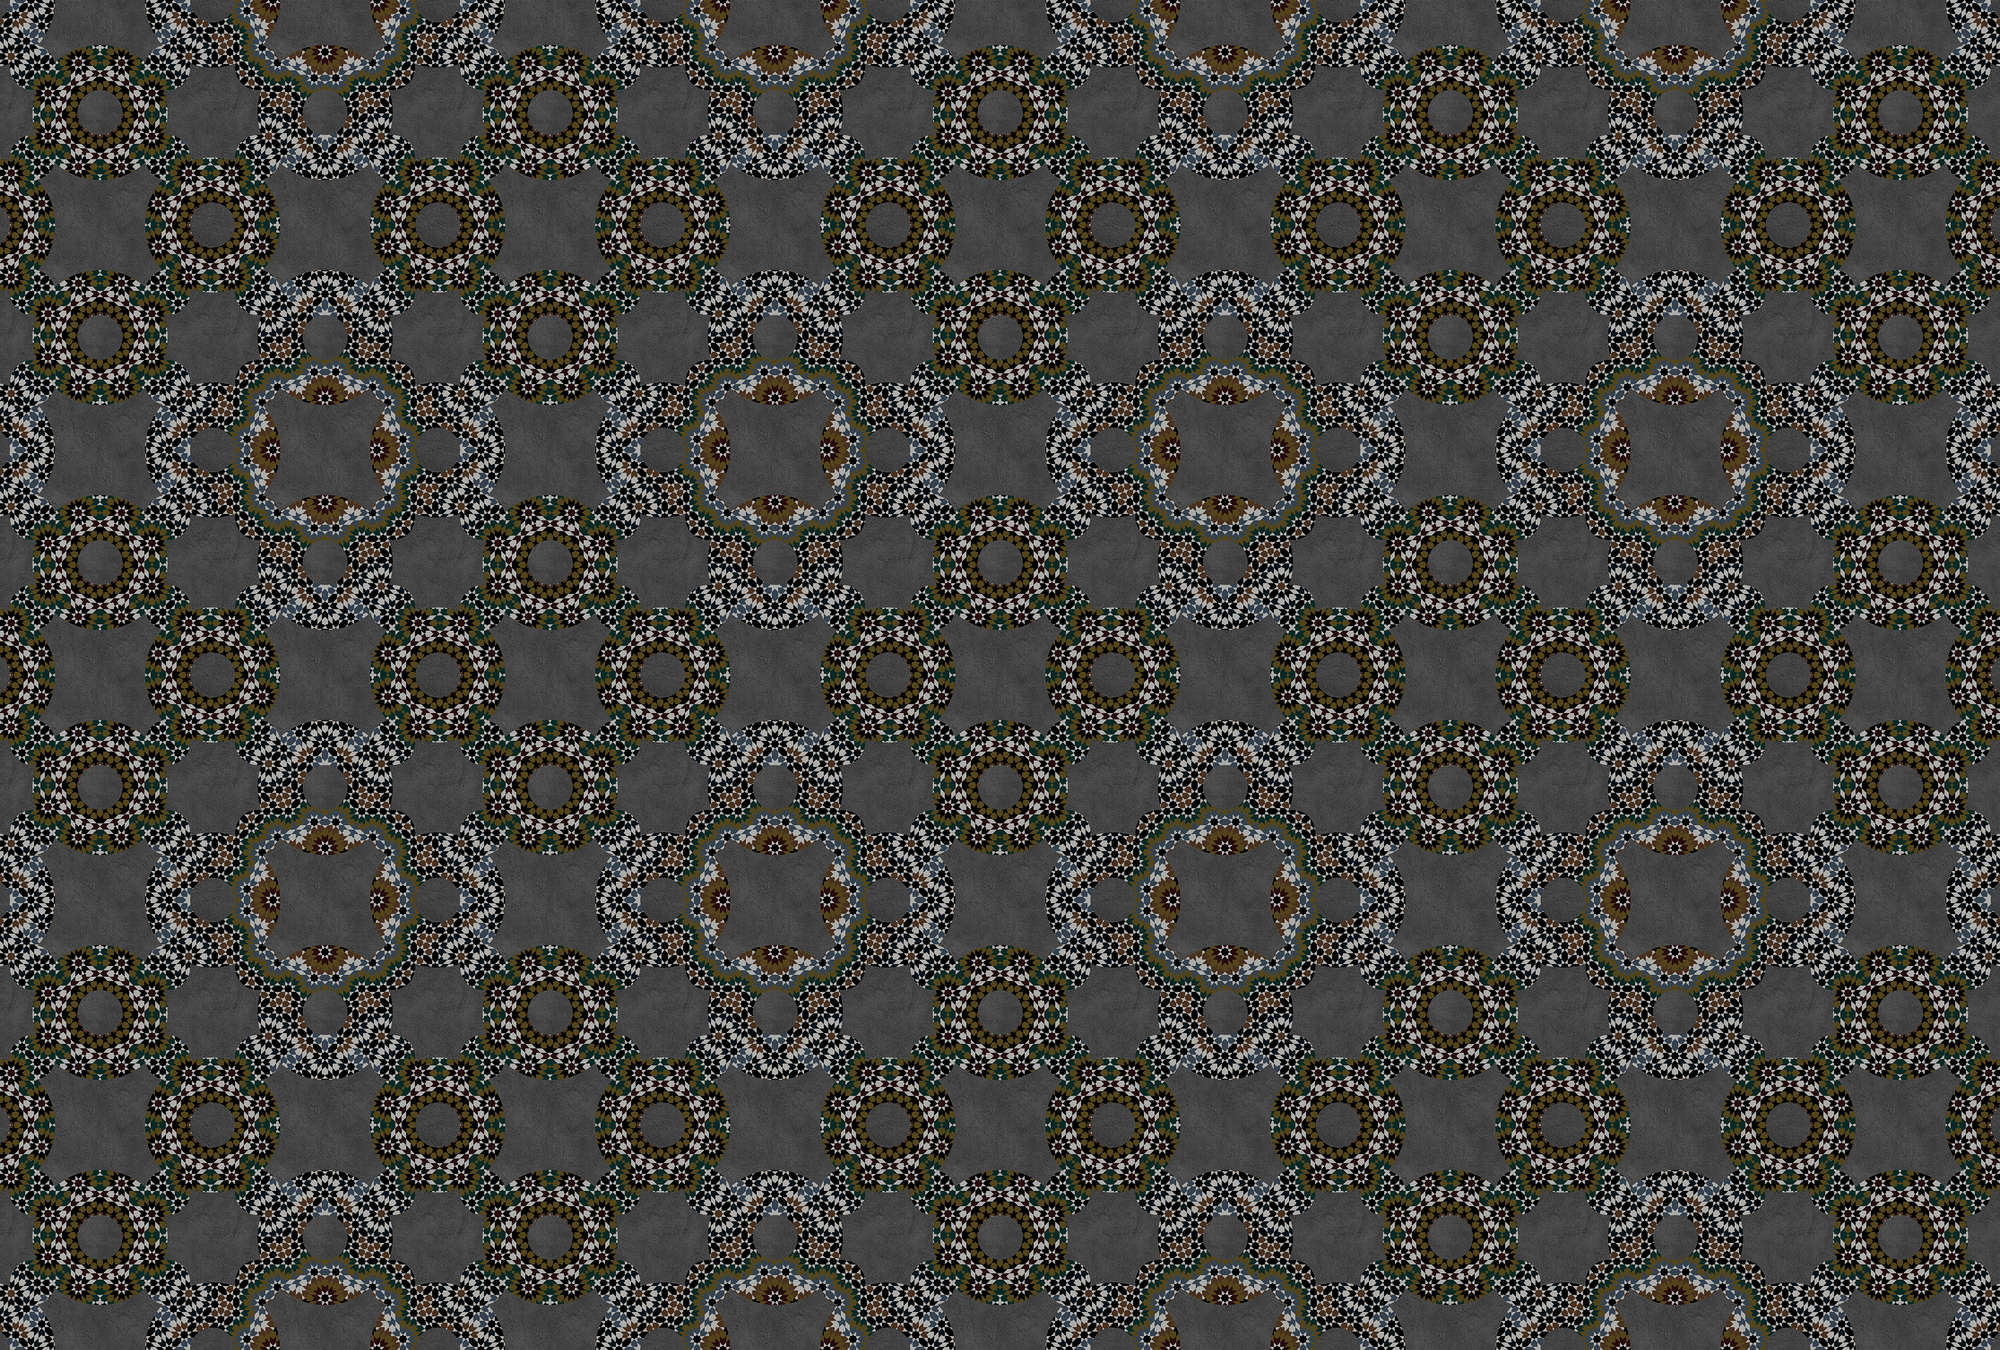             Pattern mural anthracite with mosaic design
        